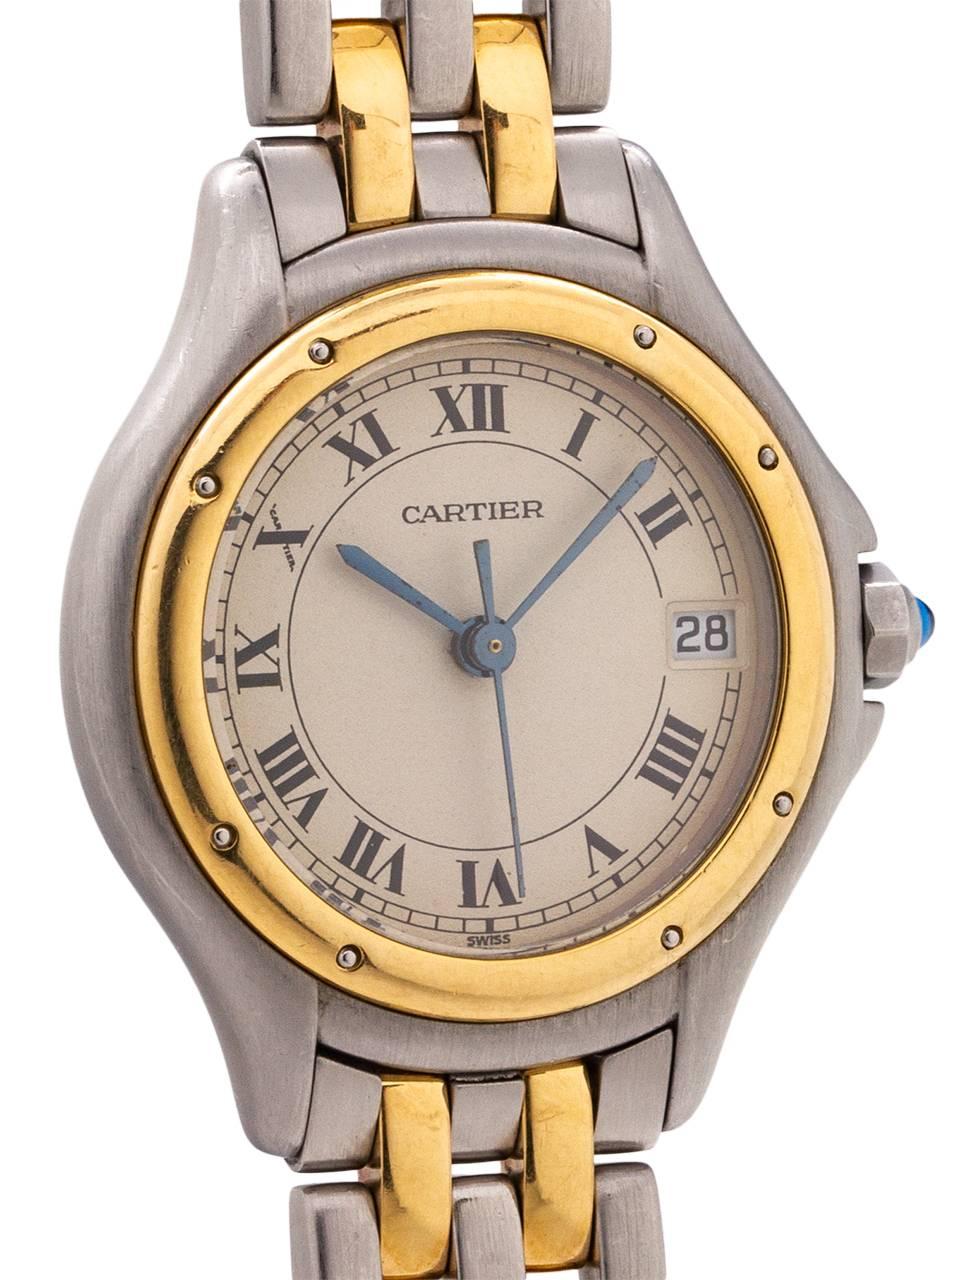 
Cartier lady’s Cougar model SS/18K YG circa 1980’s. Featuring round 27mm diameter case with rounded stepped bezel secured by screws, antique white dial with classic Cartier Roman figures and blued steel hands. Powered by quartz movement with sweep